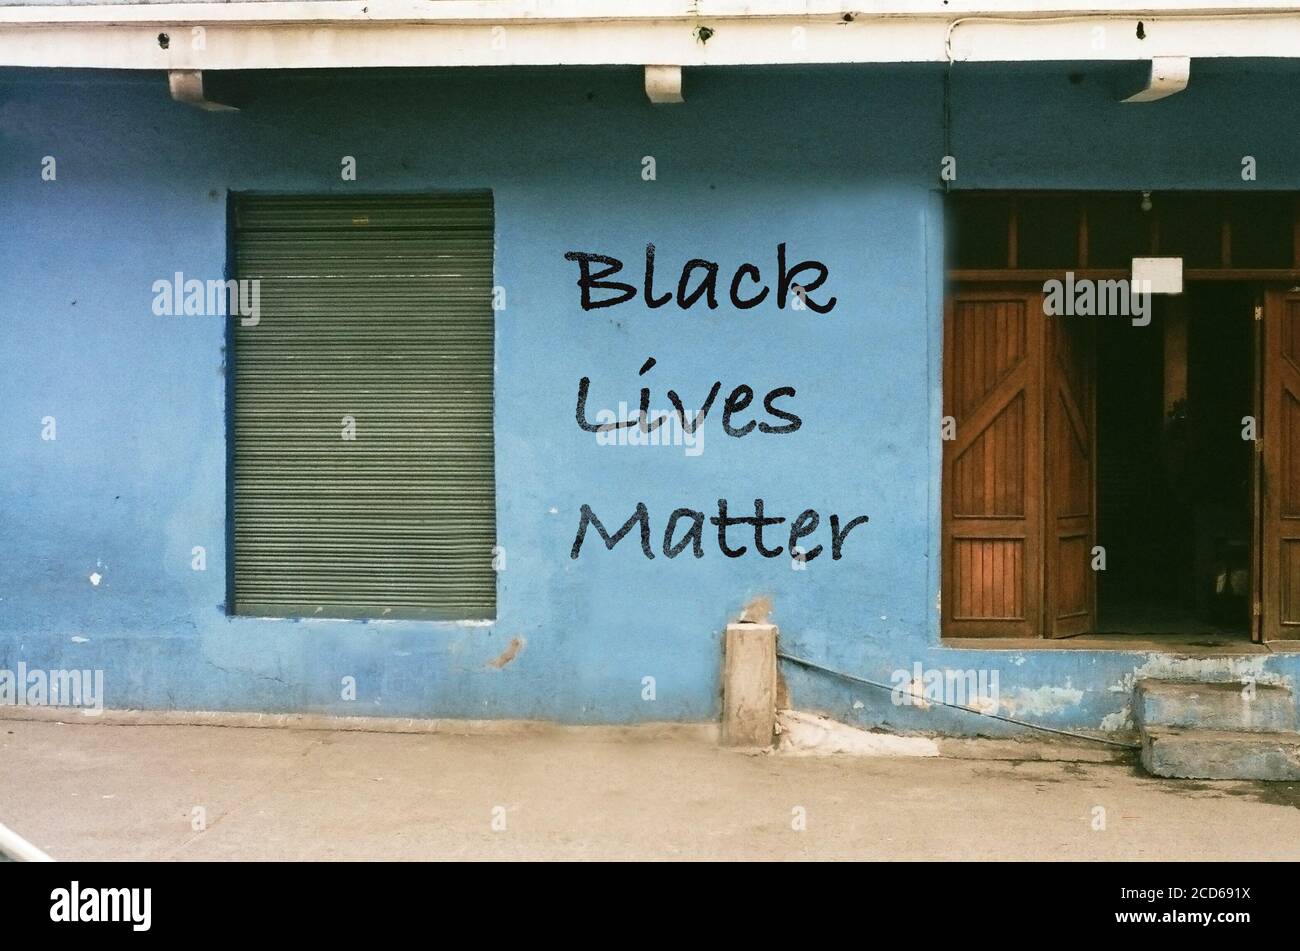 Black Lives matter written on blue wall in a rural area of africa Stock Photo